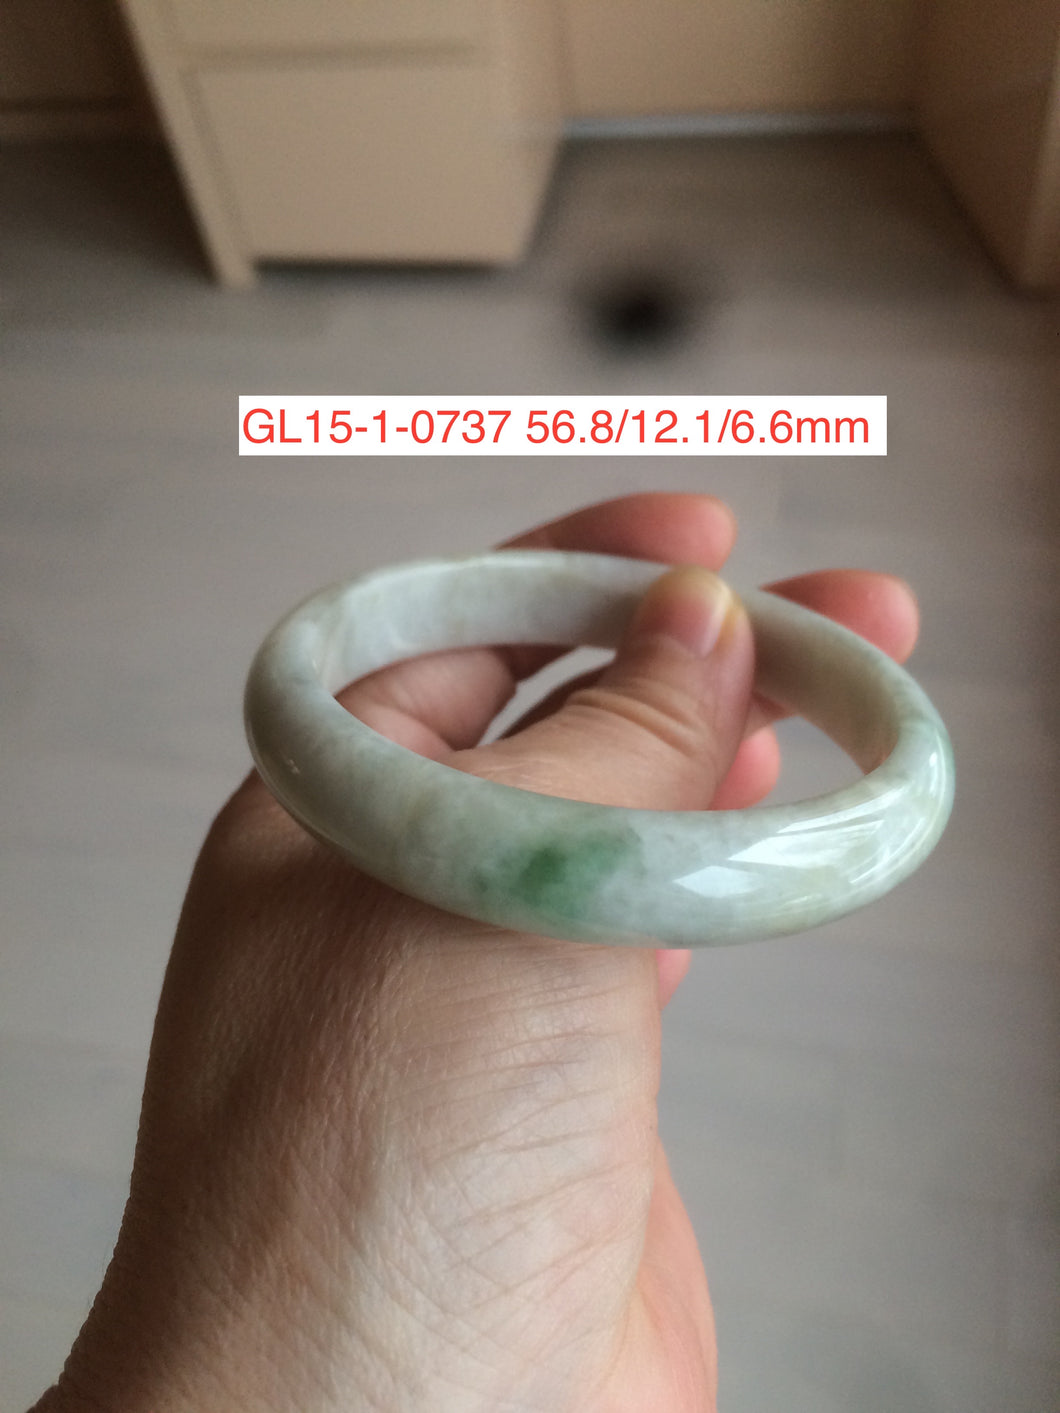 53-57mm Type A 100% Natural light green/white Jadeite Jade bangle (with defects) group GL15